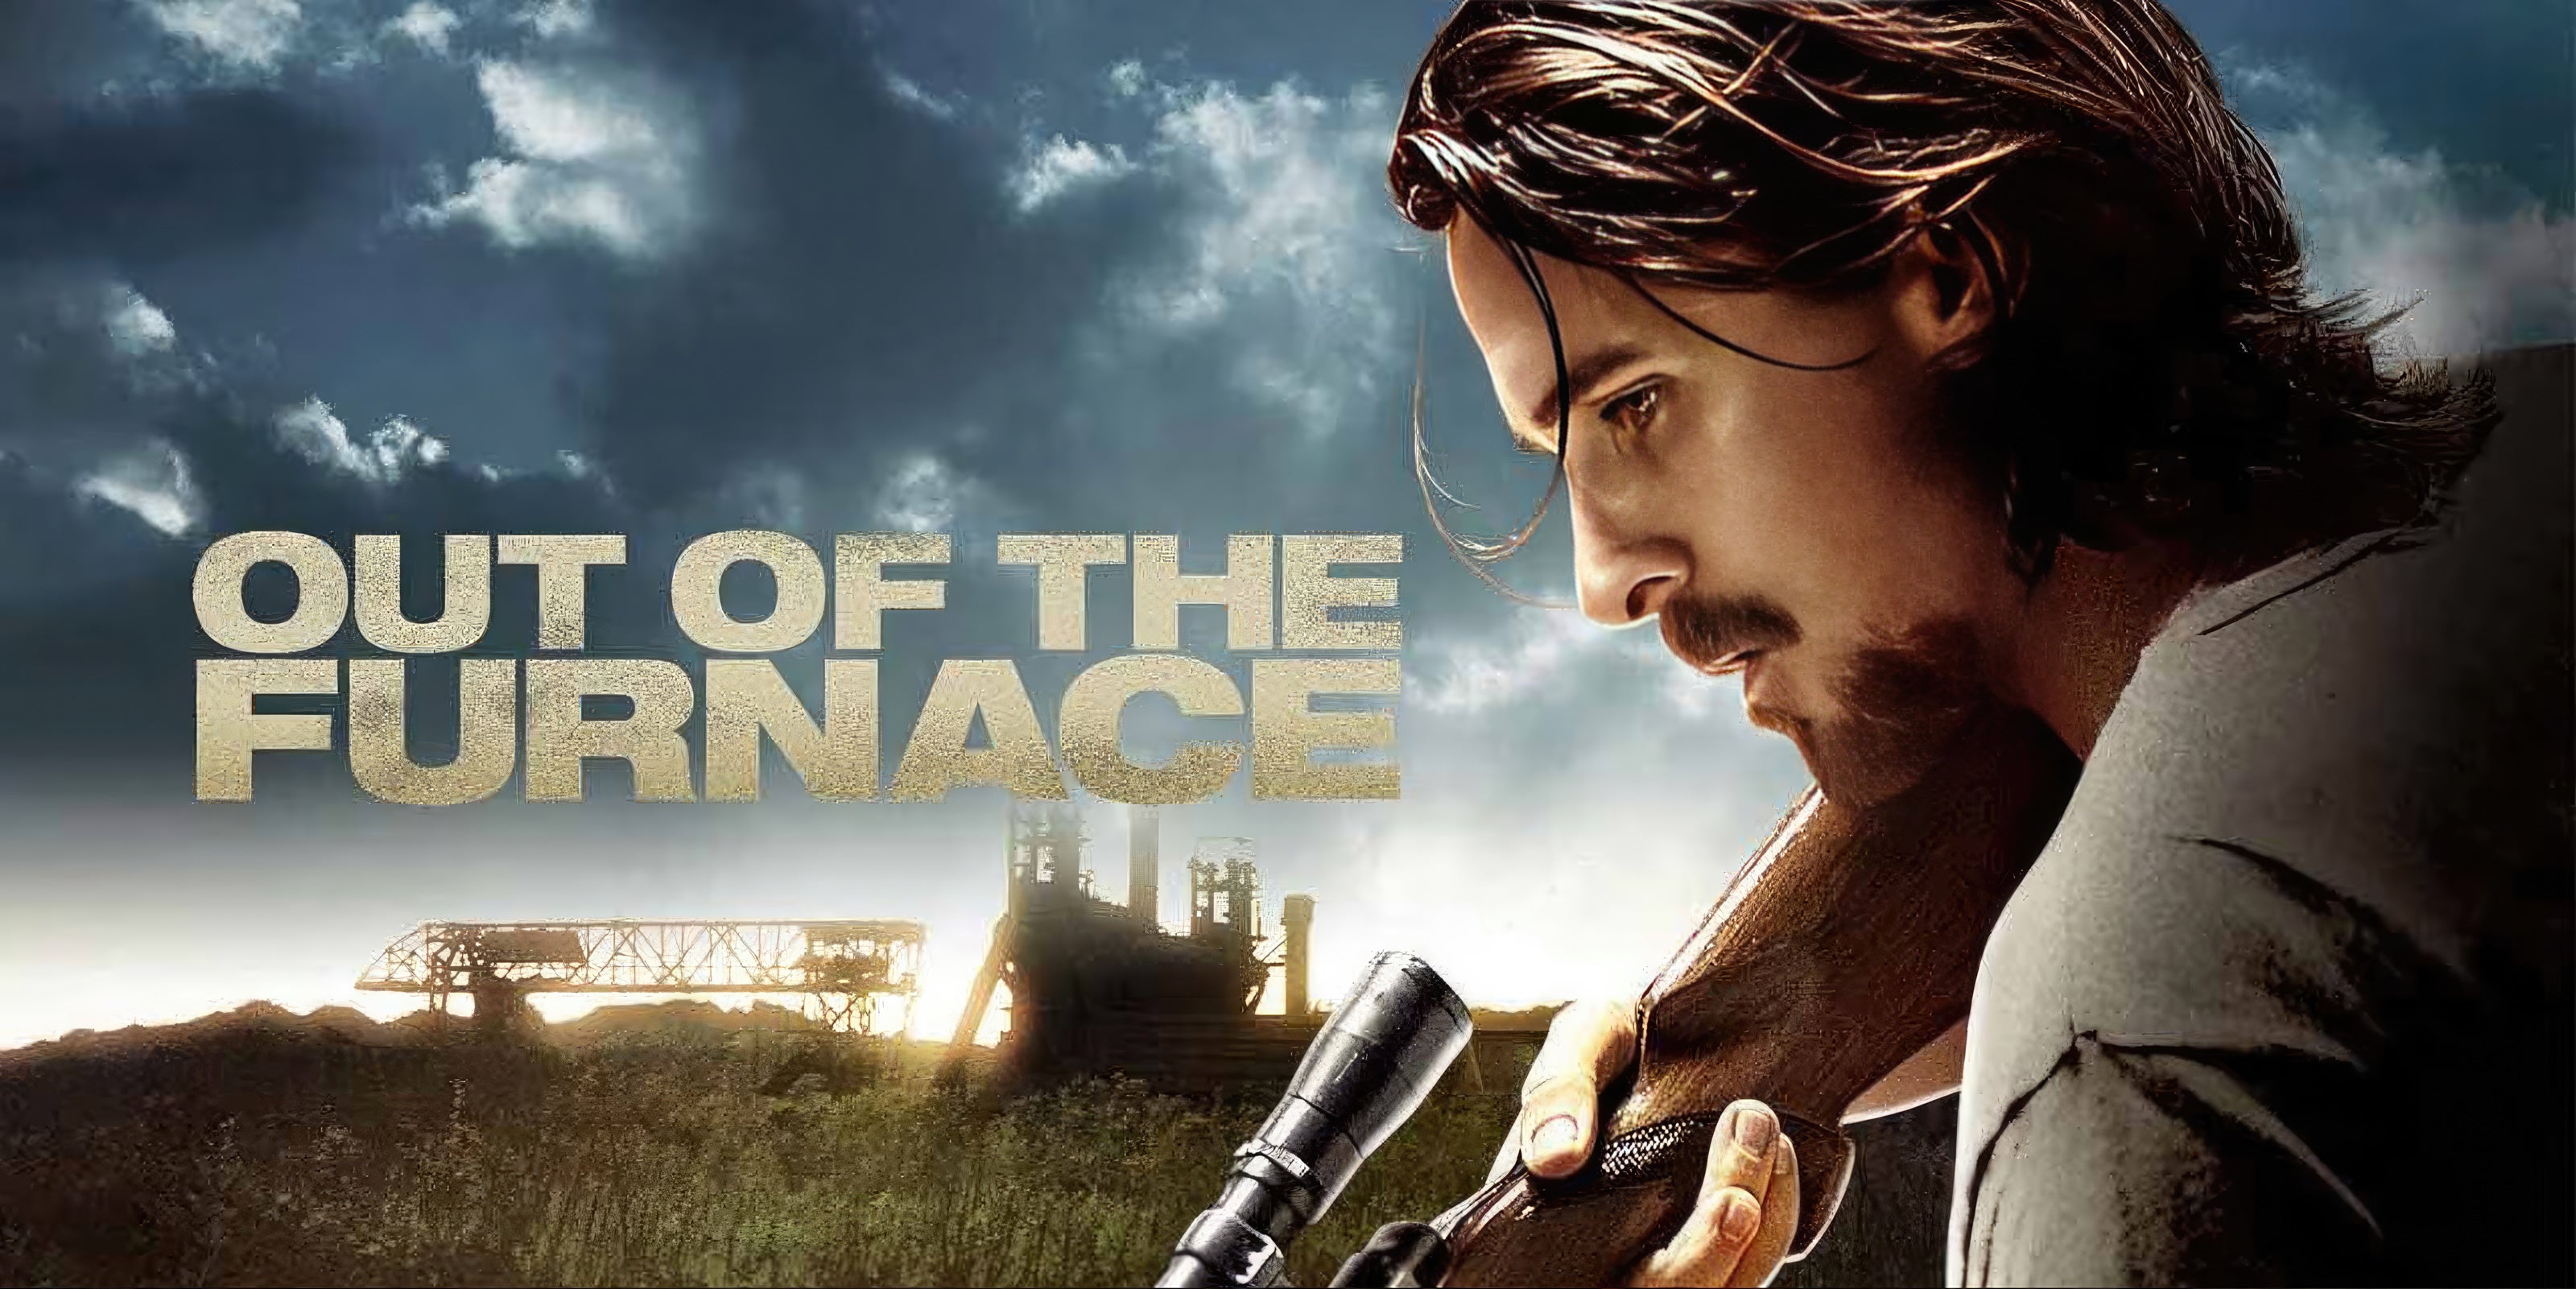 Out of the Furnace Script Screenplay - Image of Movie Film Poster